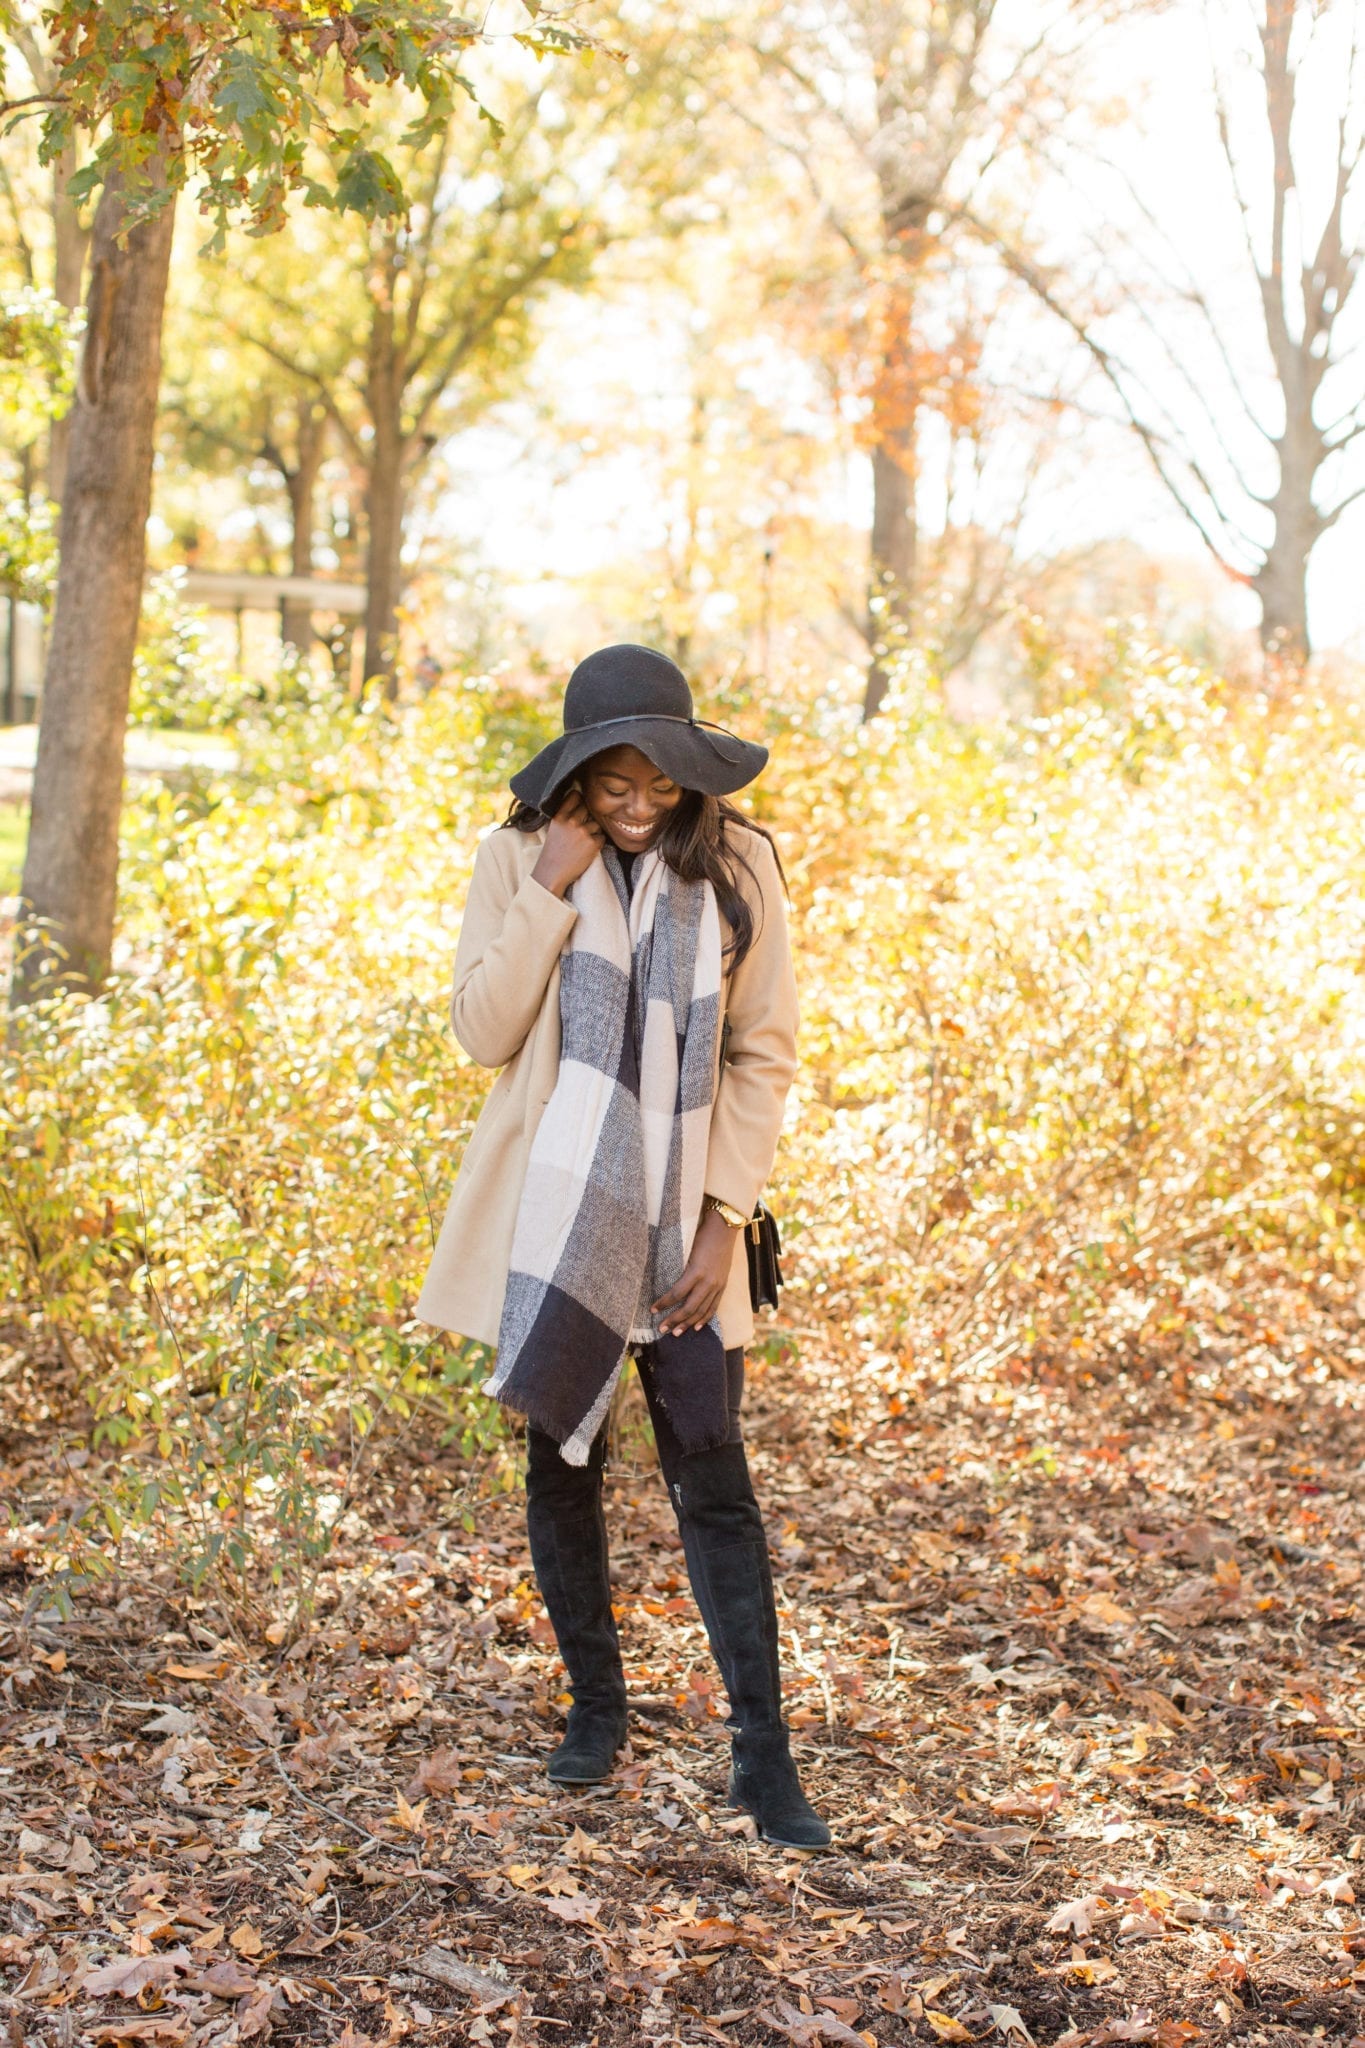 There's nothing more stylish about a fall/winter wardrobe than camel coats. The neutral palette makes it the best for matching all of your #ootds this season. Of course, I enjoy a nice pop of color, but I enjoy the versatility that neutrals can bring. Check out my camel coat choices on the blog! | GoodTomiCha Southern Fashion + Lifestyle Blogger 